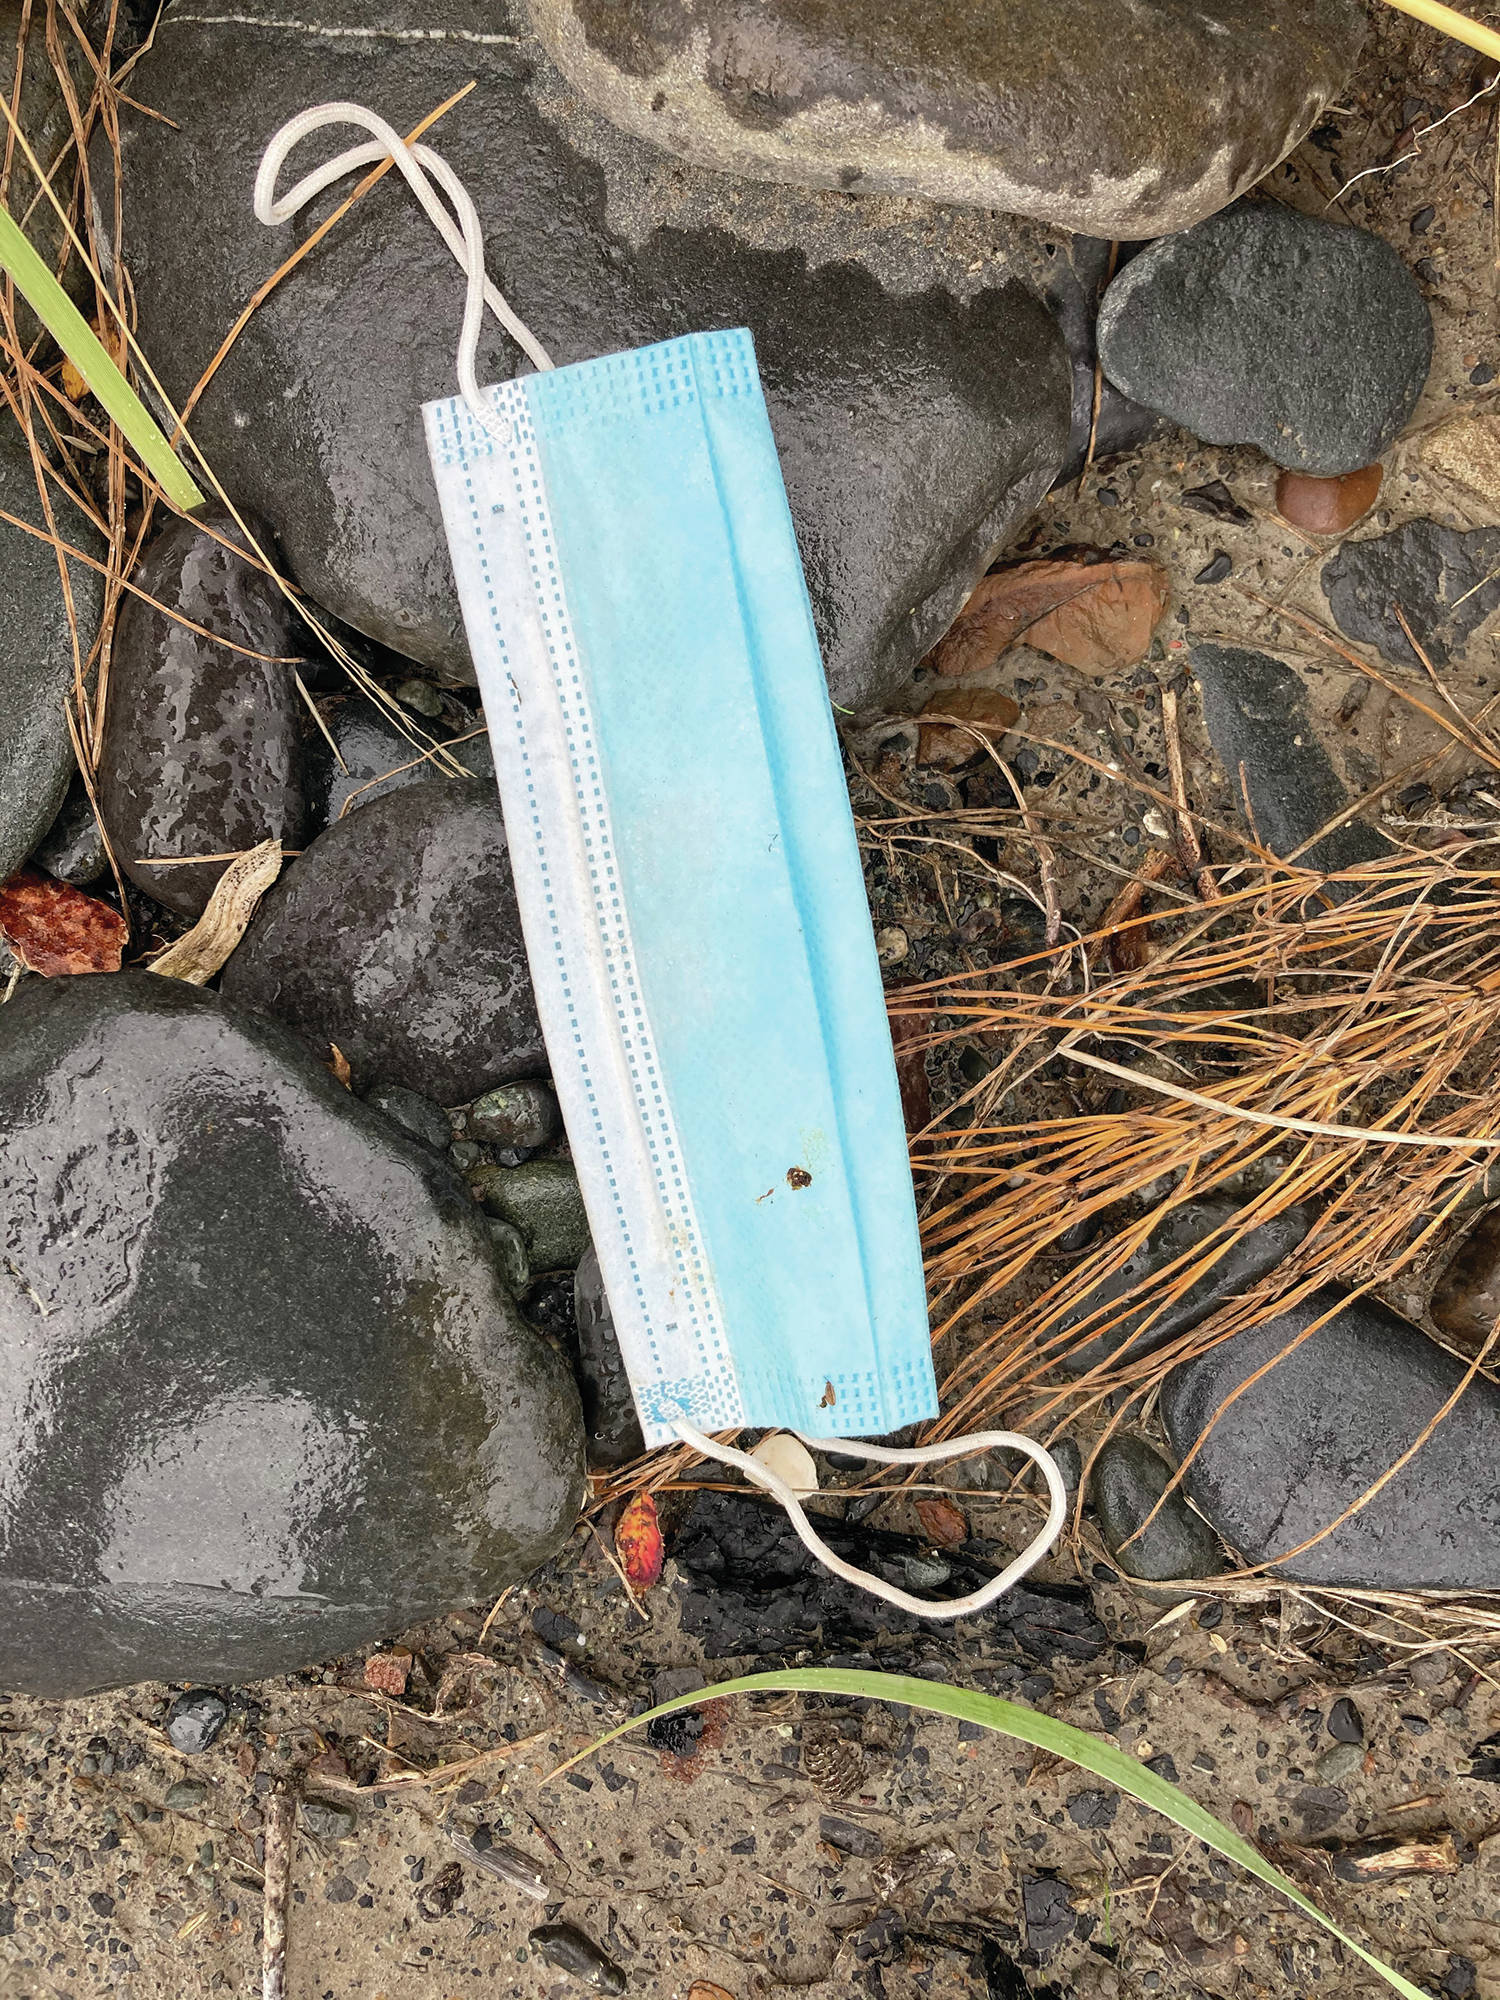 This face mask is among items found on a CoastWalk done on Sunday, Oct. 4, 2020, on the Diamond Creek beach near Homer, Alaska. (Photo by Michael Armstrong/Homer News)